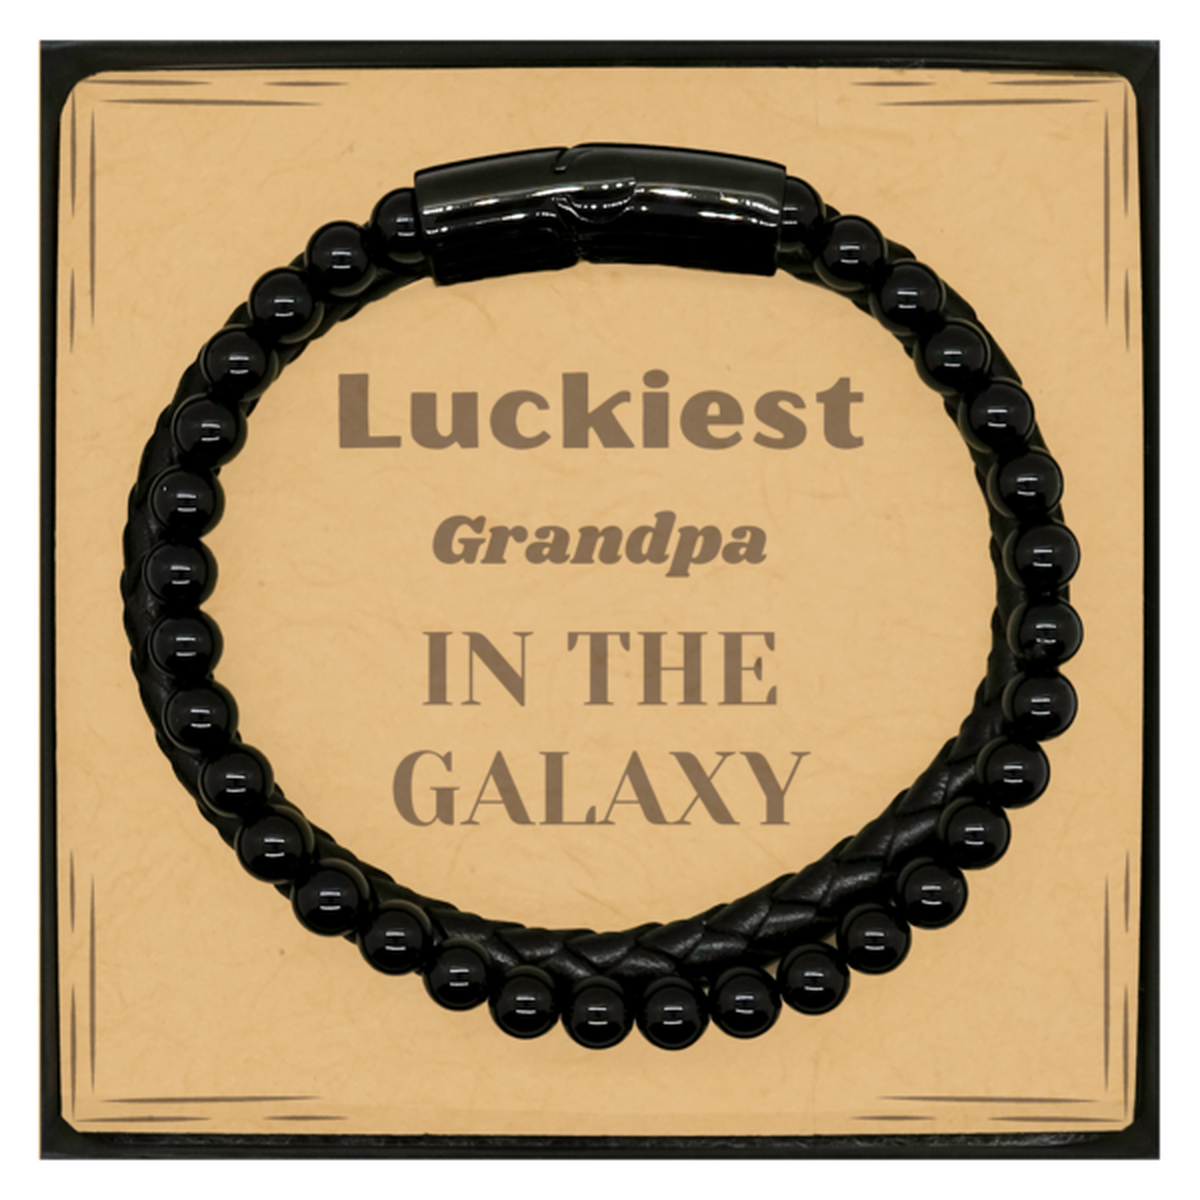 Luckiest Grandpa in the Galaxy, To My Grandpa Message Card Gifts, Christmas Grandpa Stone Leather Bracelets Gifts, X-mas Birthday Unique Gifts For Grandpa Men Women